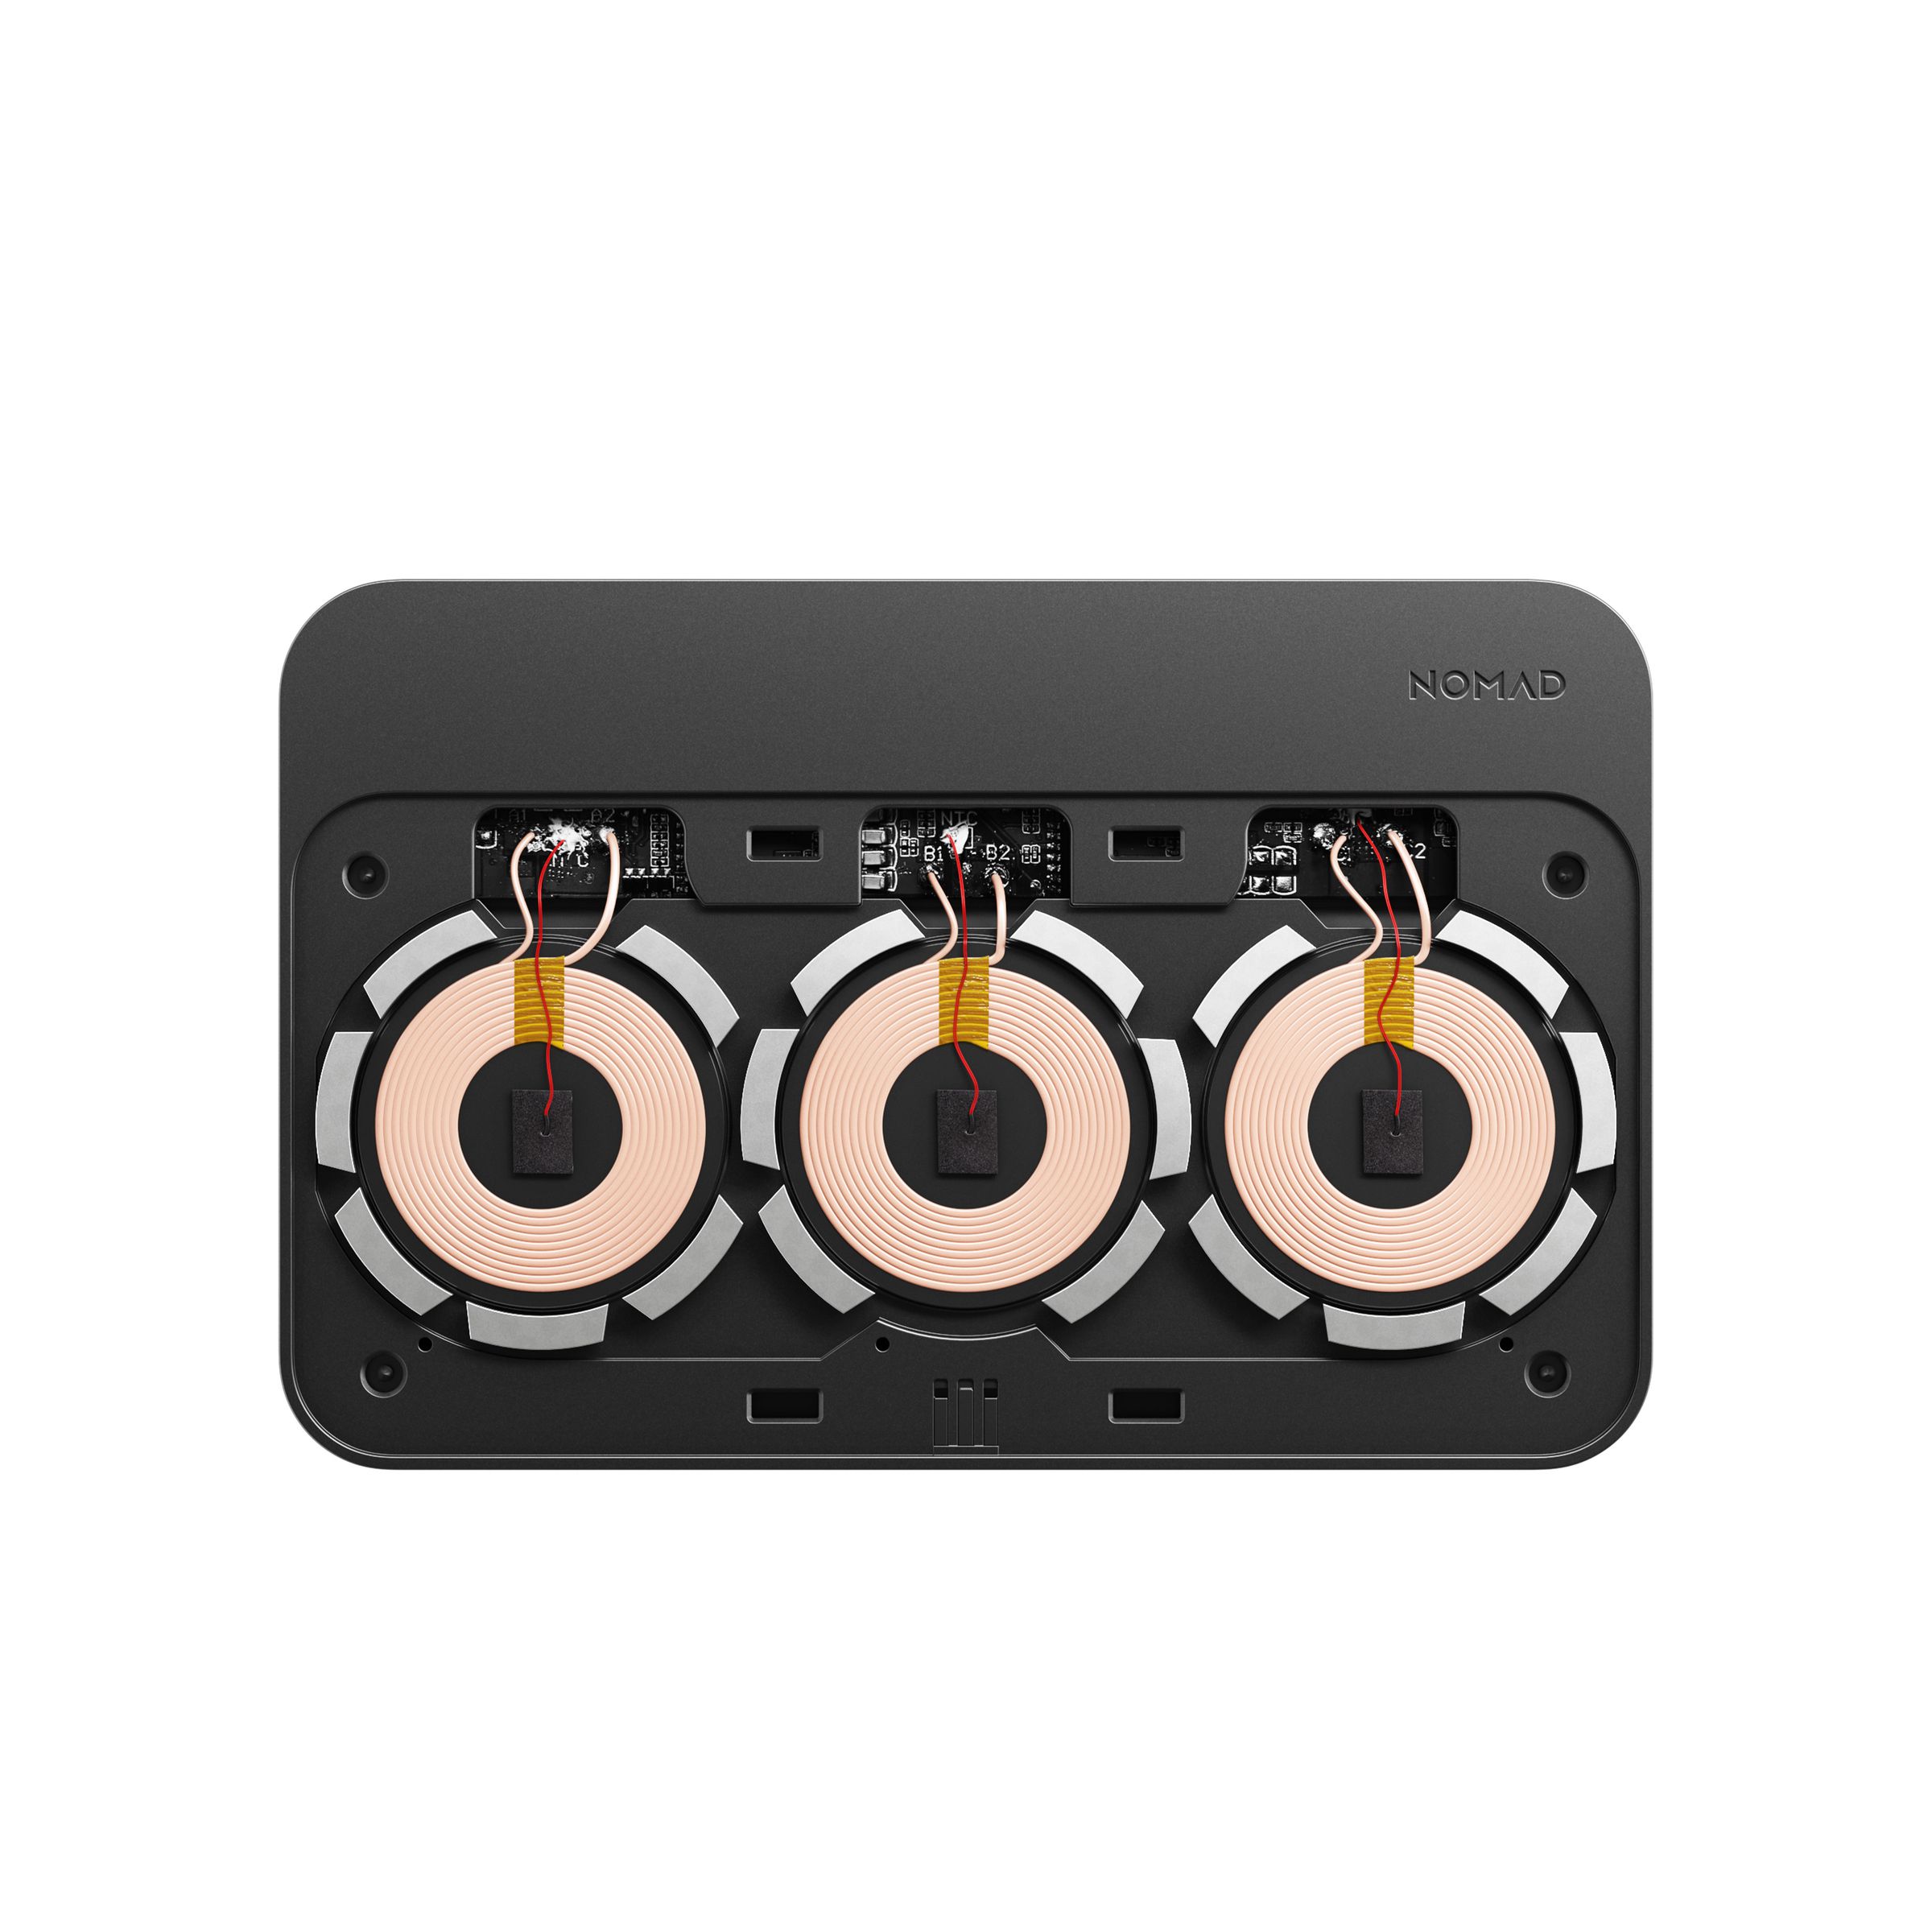 Under the Base Station Hub’s leather pad are three charging coils surrounded by magnets, which help align compatible devices so they charge efficiently.